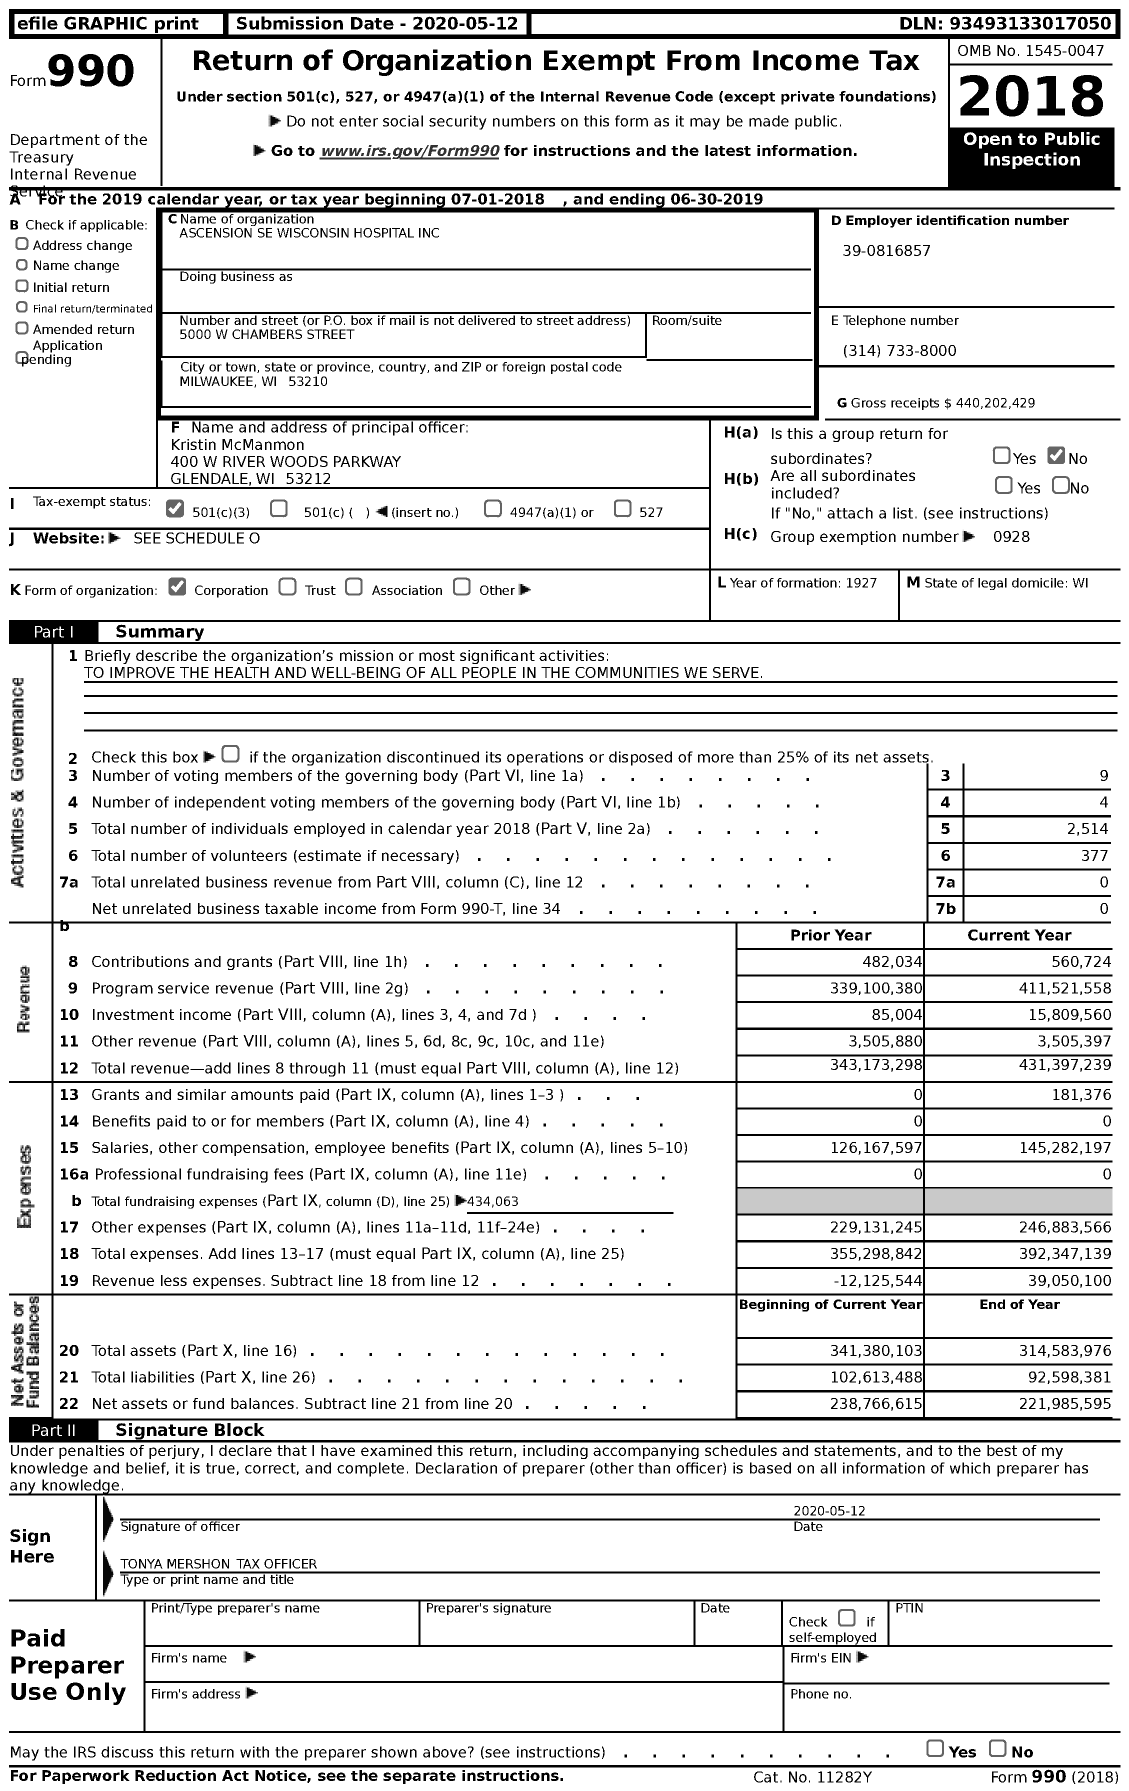 Image of first page of 2018 Form 990 for Ascension SE Wisconsin Hospital